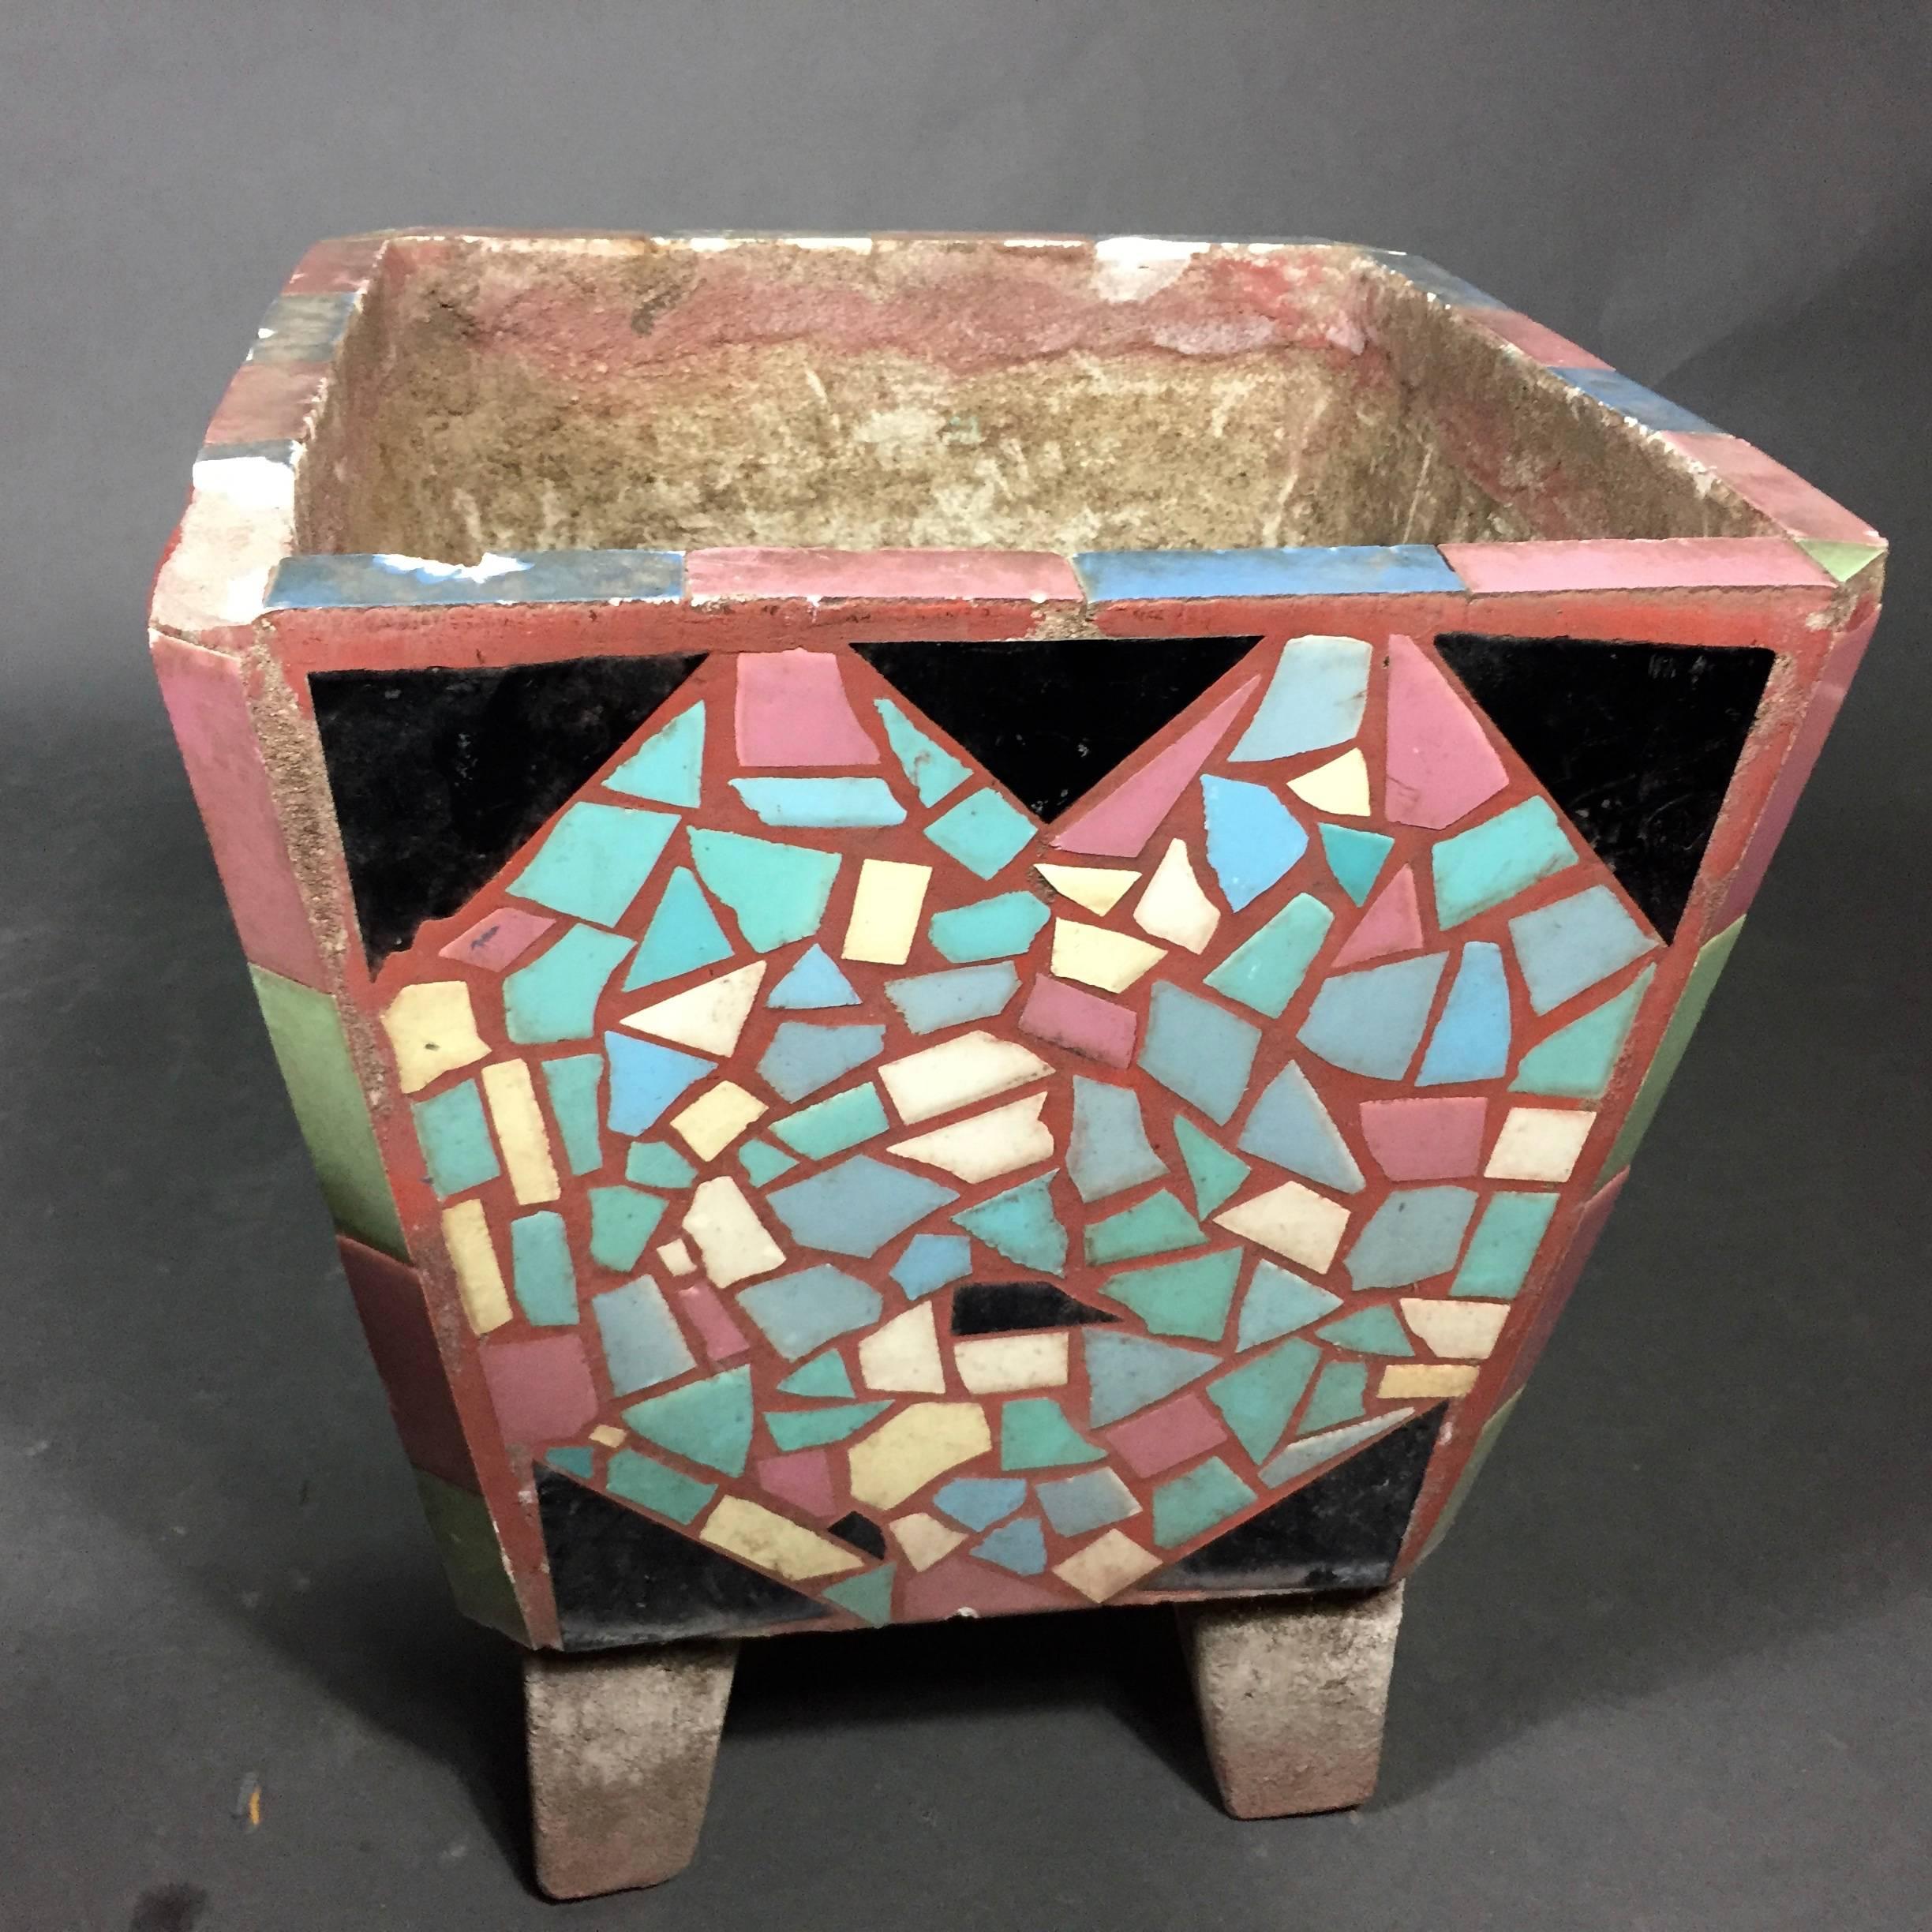 Mid-20th Century 1950s American Cast Stone Tile Inlaid Garden Planters